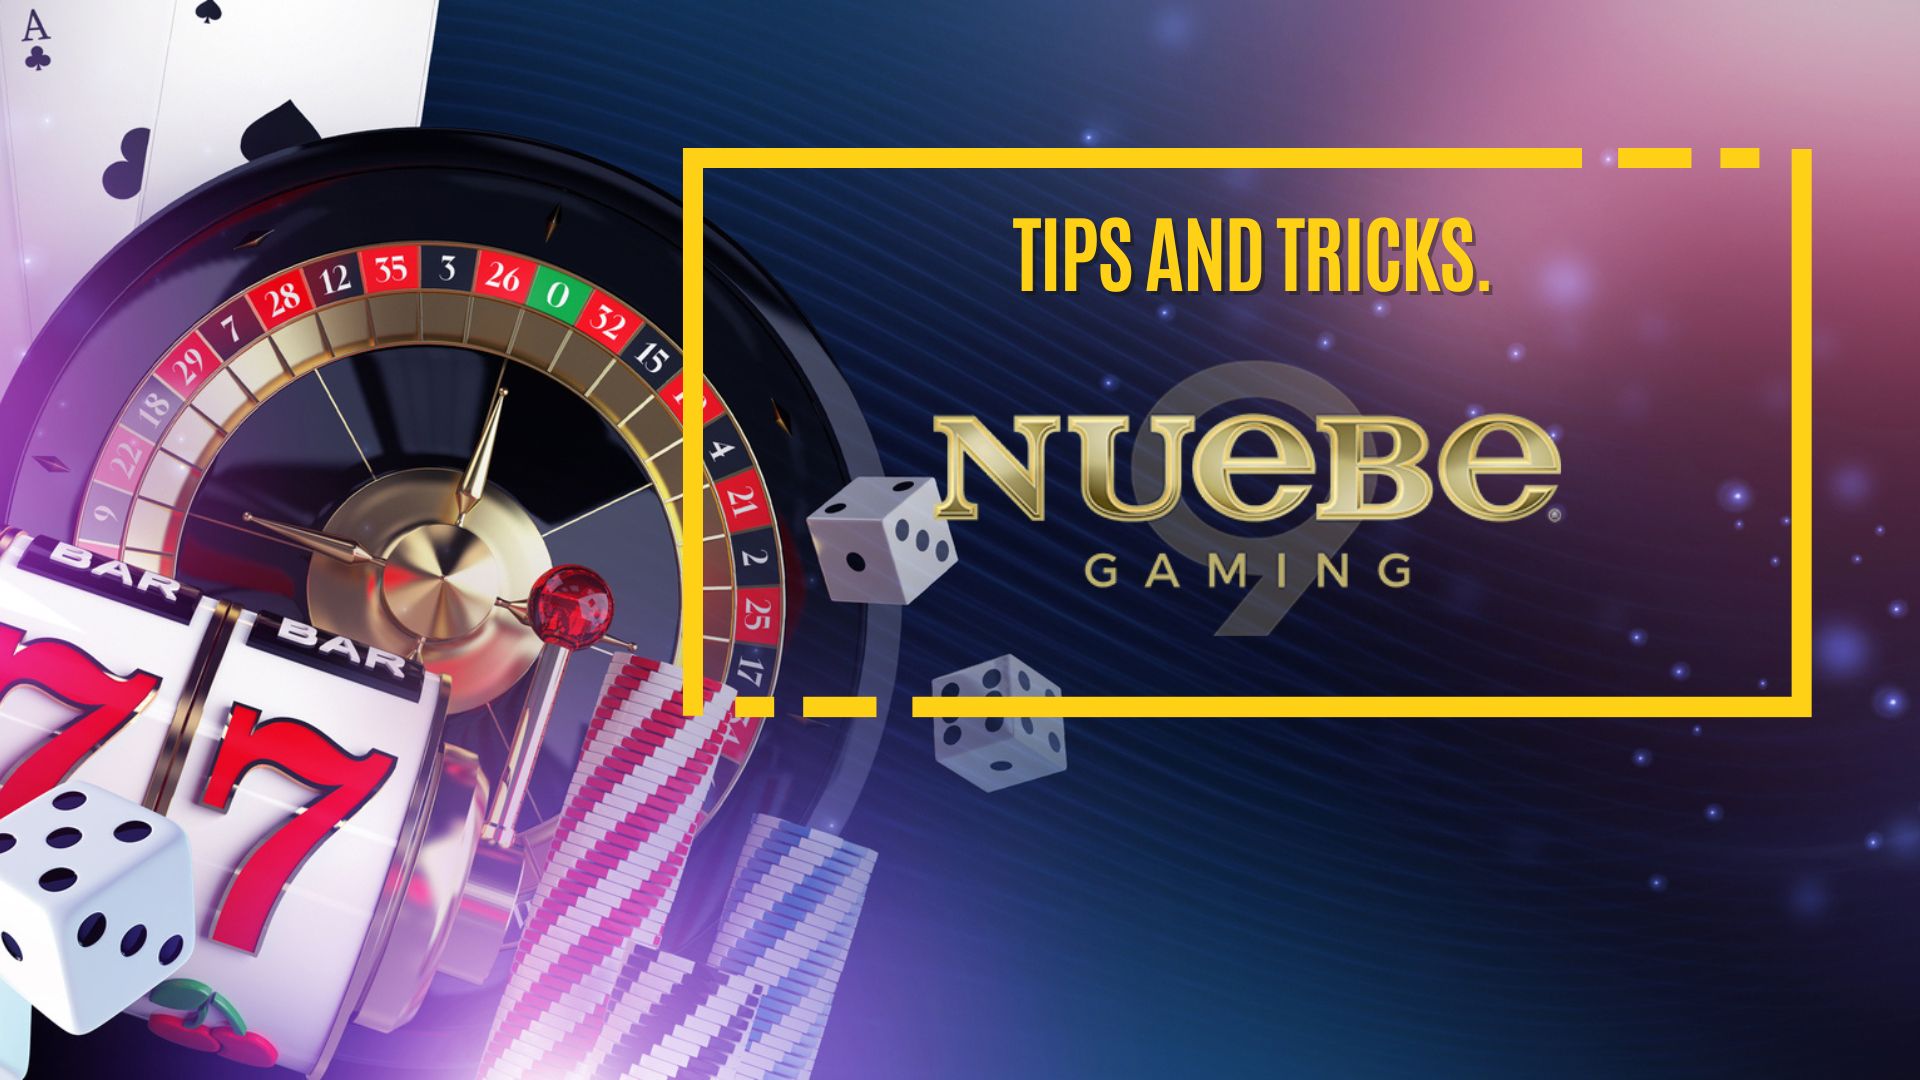 Need a better idea of how to win money at the casino? Check out our top 10 online casino tips and tricks for players to improve your chances of winning. We’ll show you which games you can win the most from, and how to take advantage of free bonus cash.